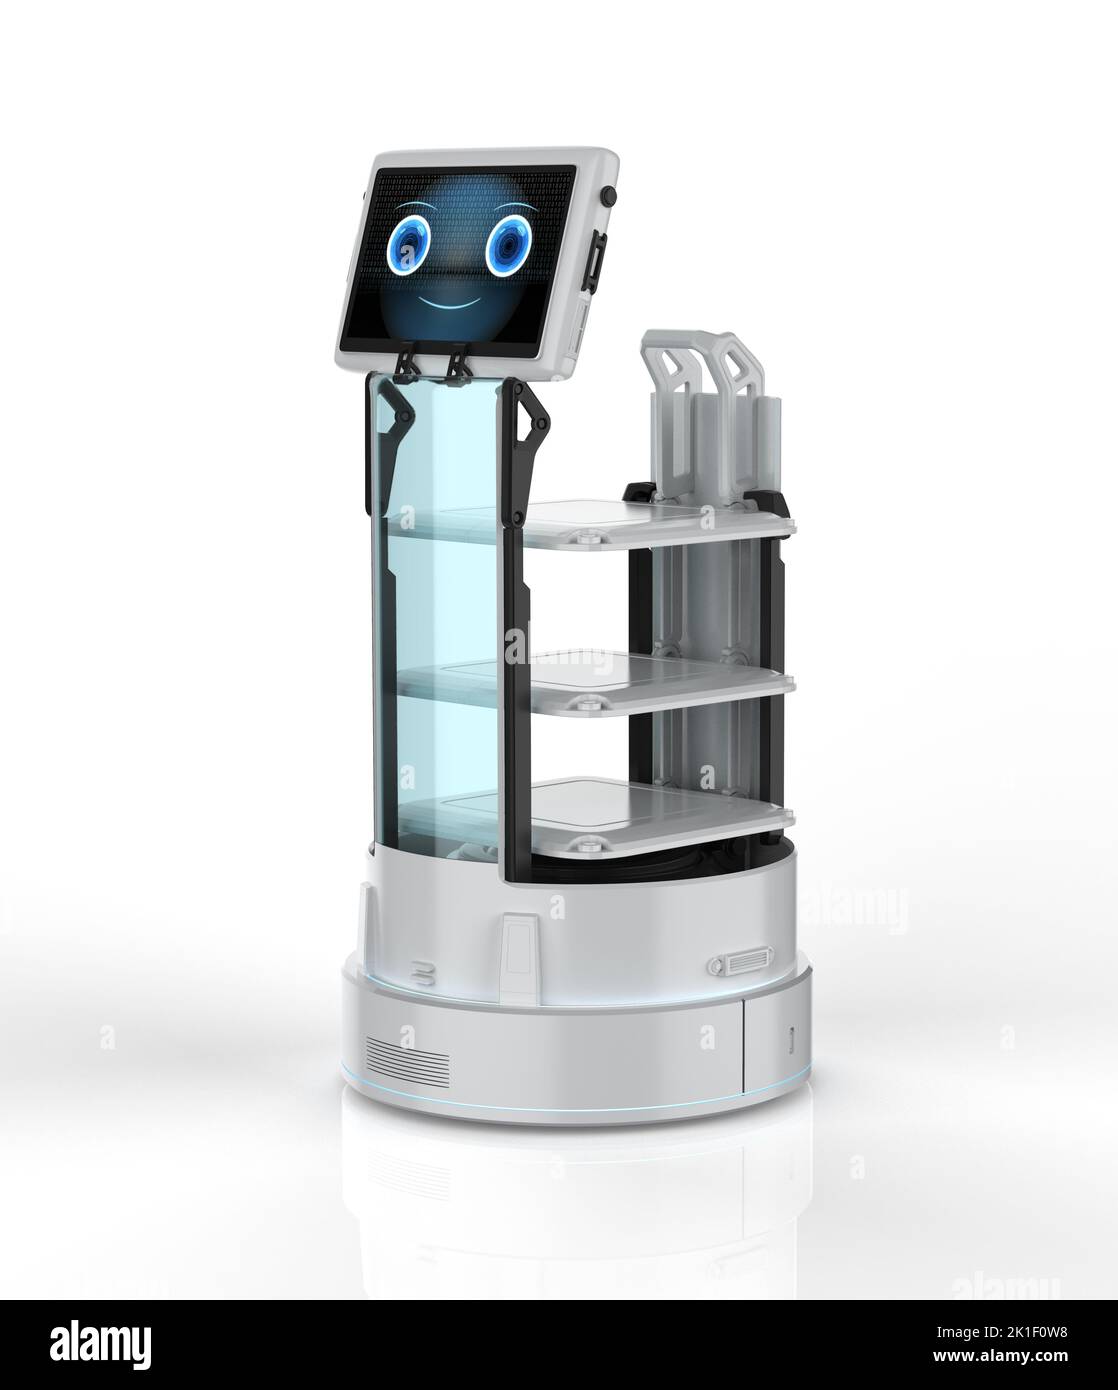 3d rendering service robot or robotic assistant with tablet and trays Stock Photo